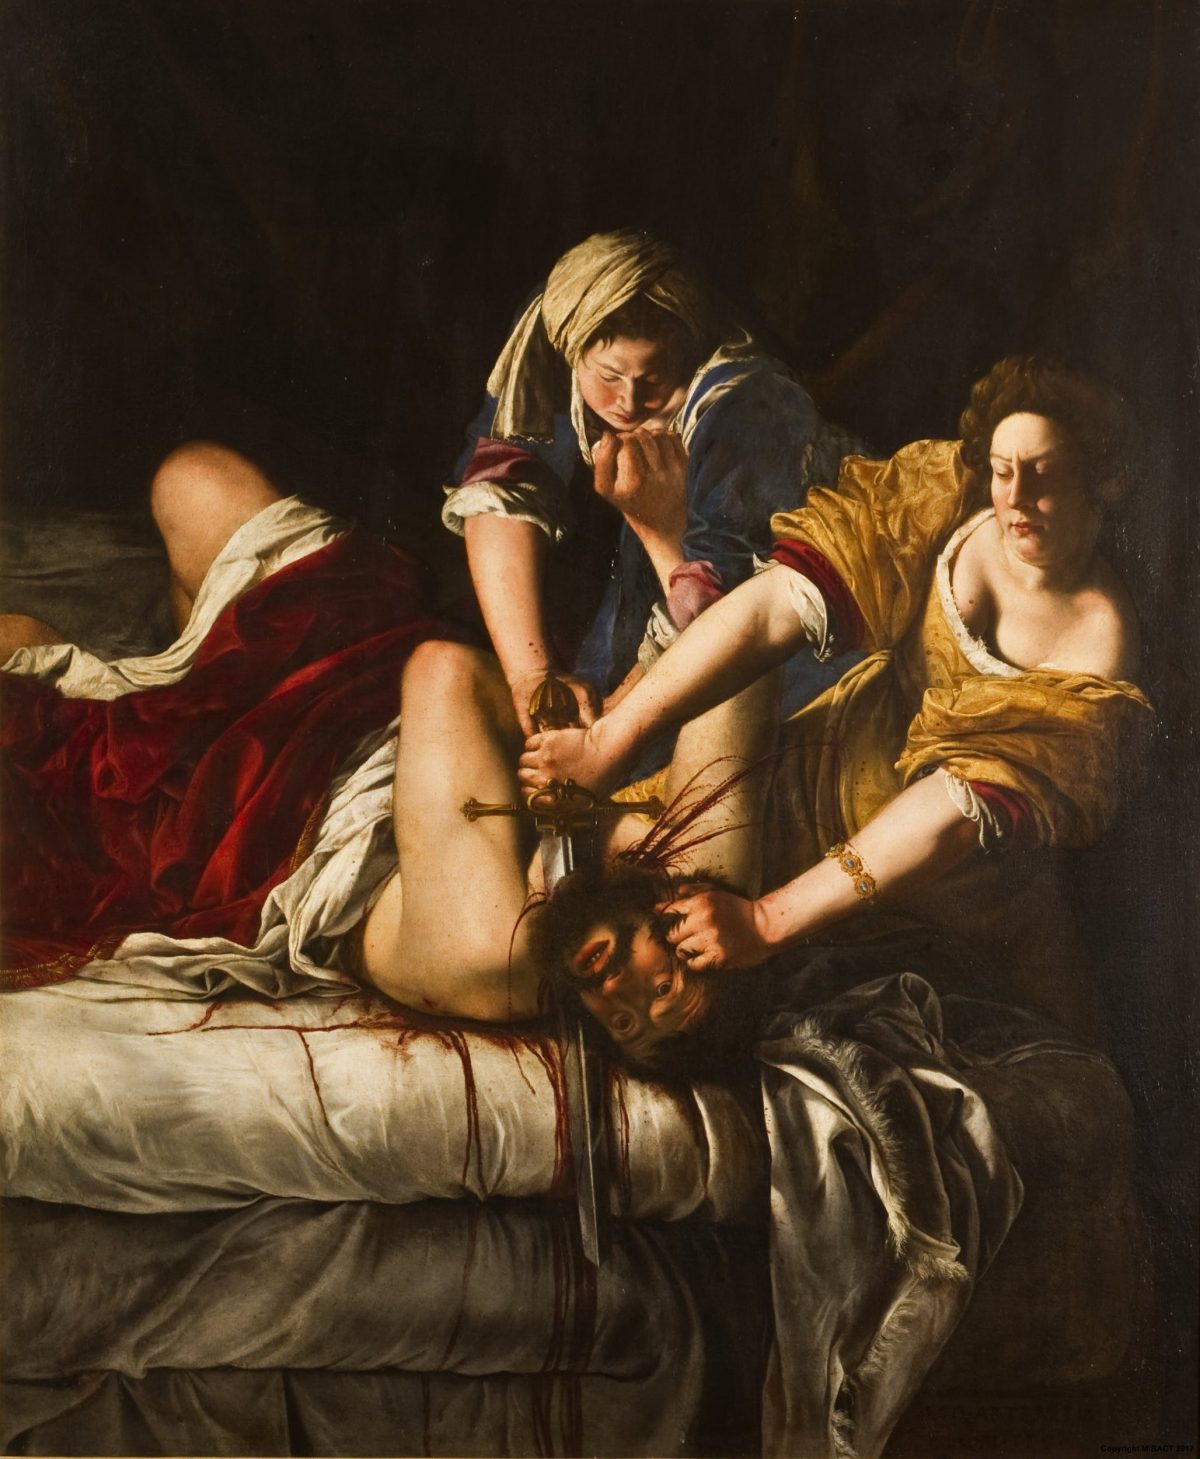 The three most violent and brutal paintings in art history